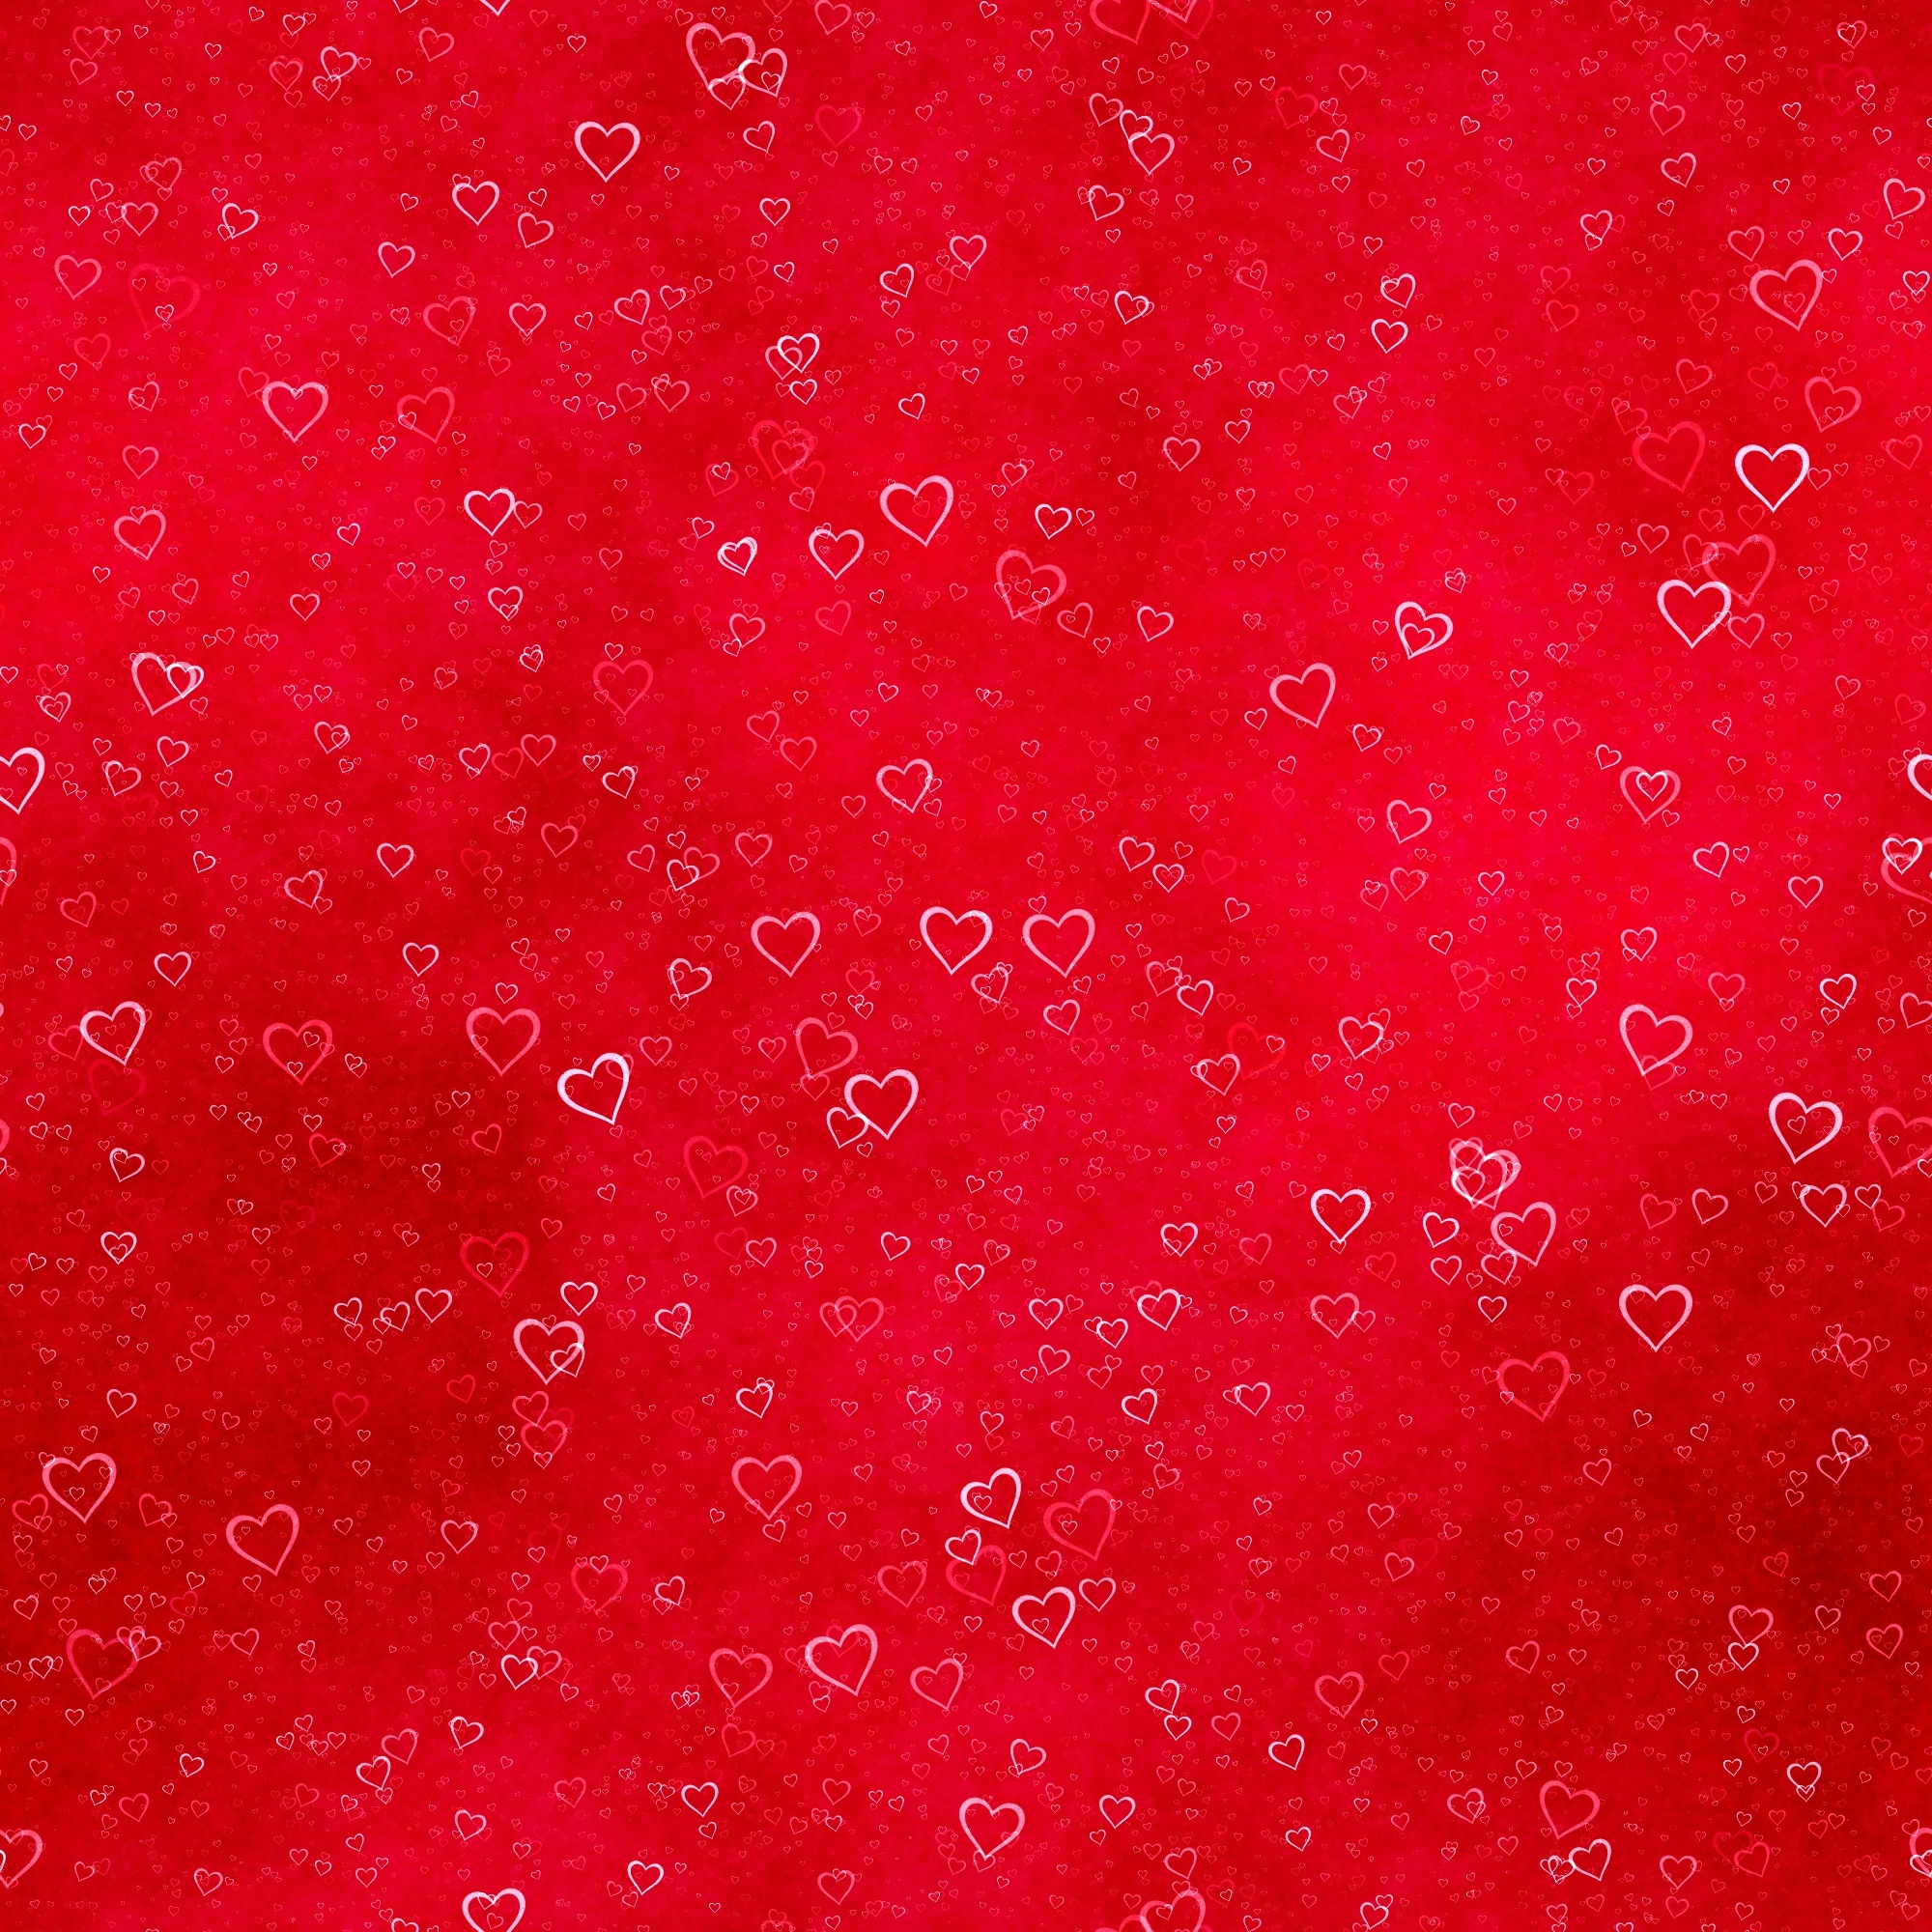 Free photo Hearts on a red background